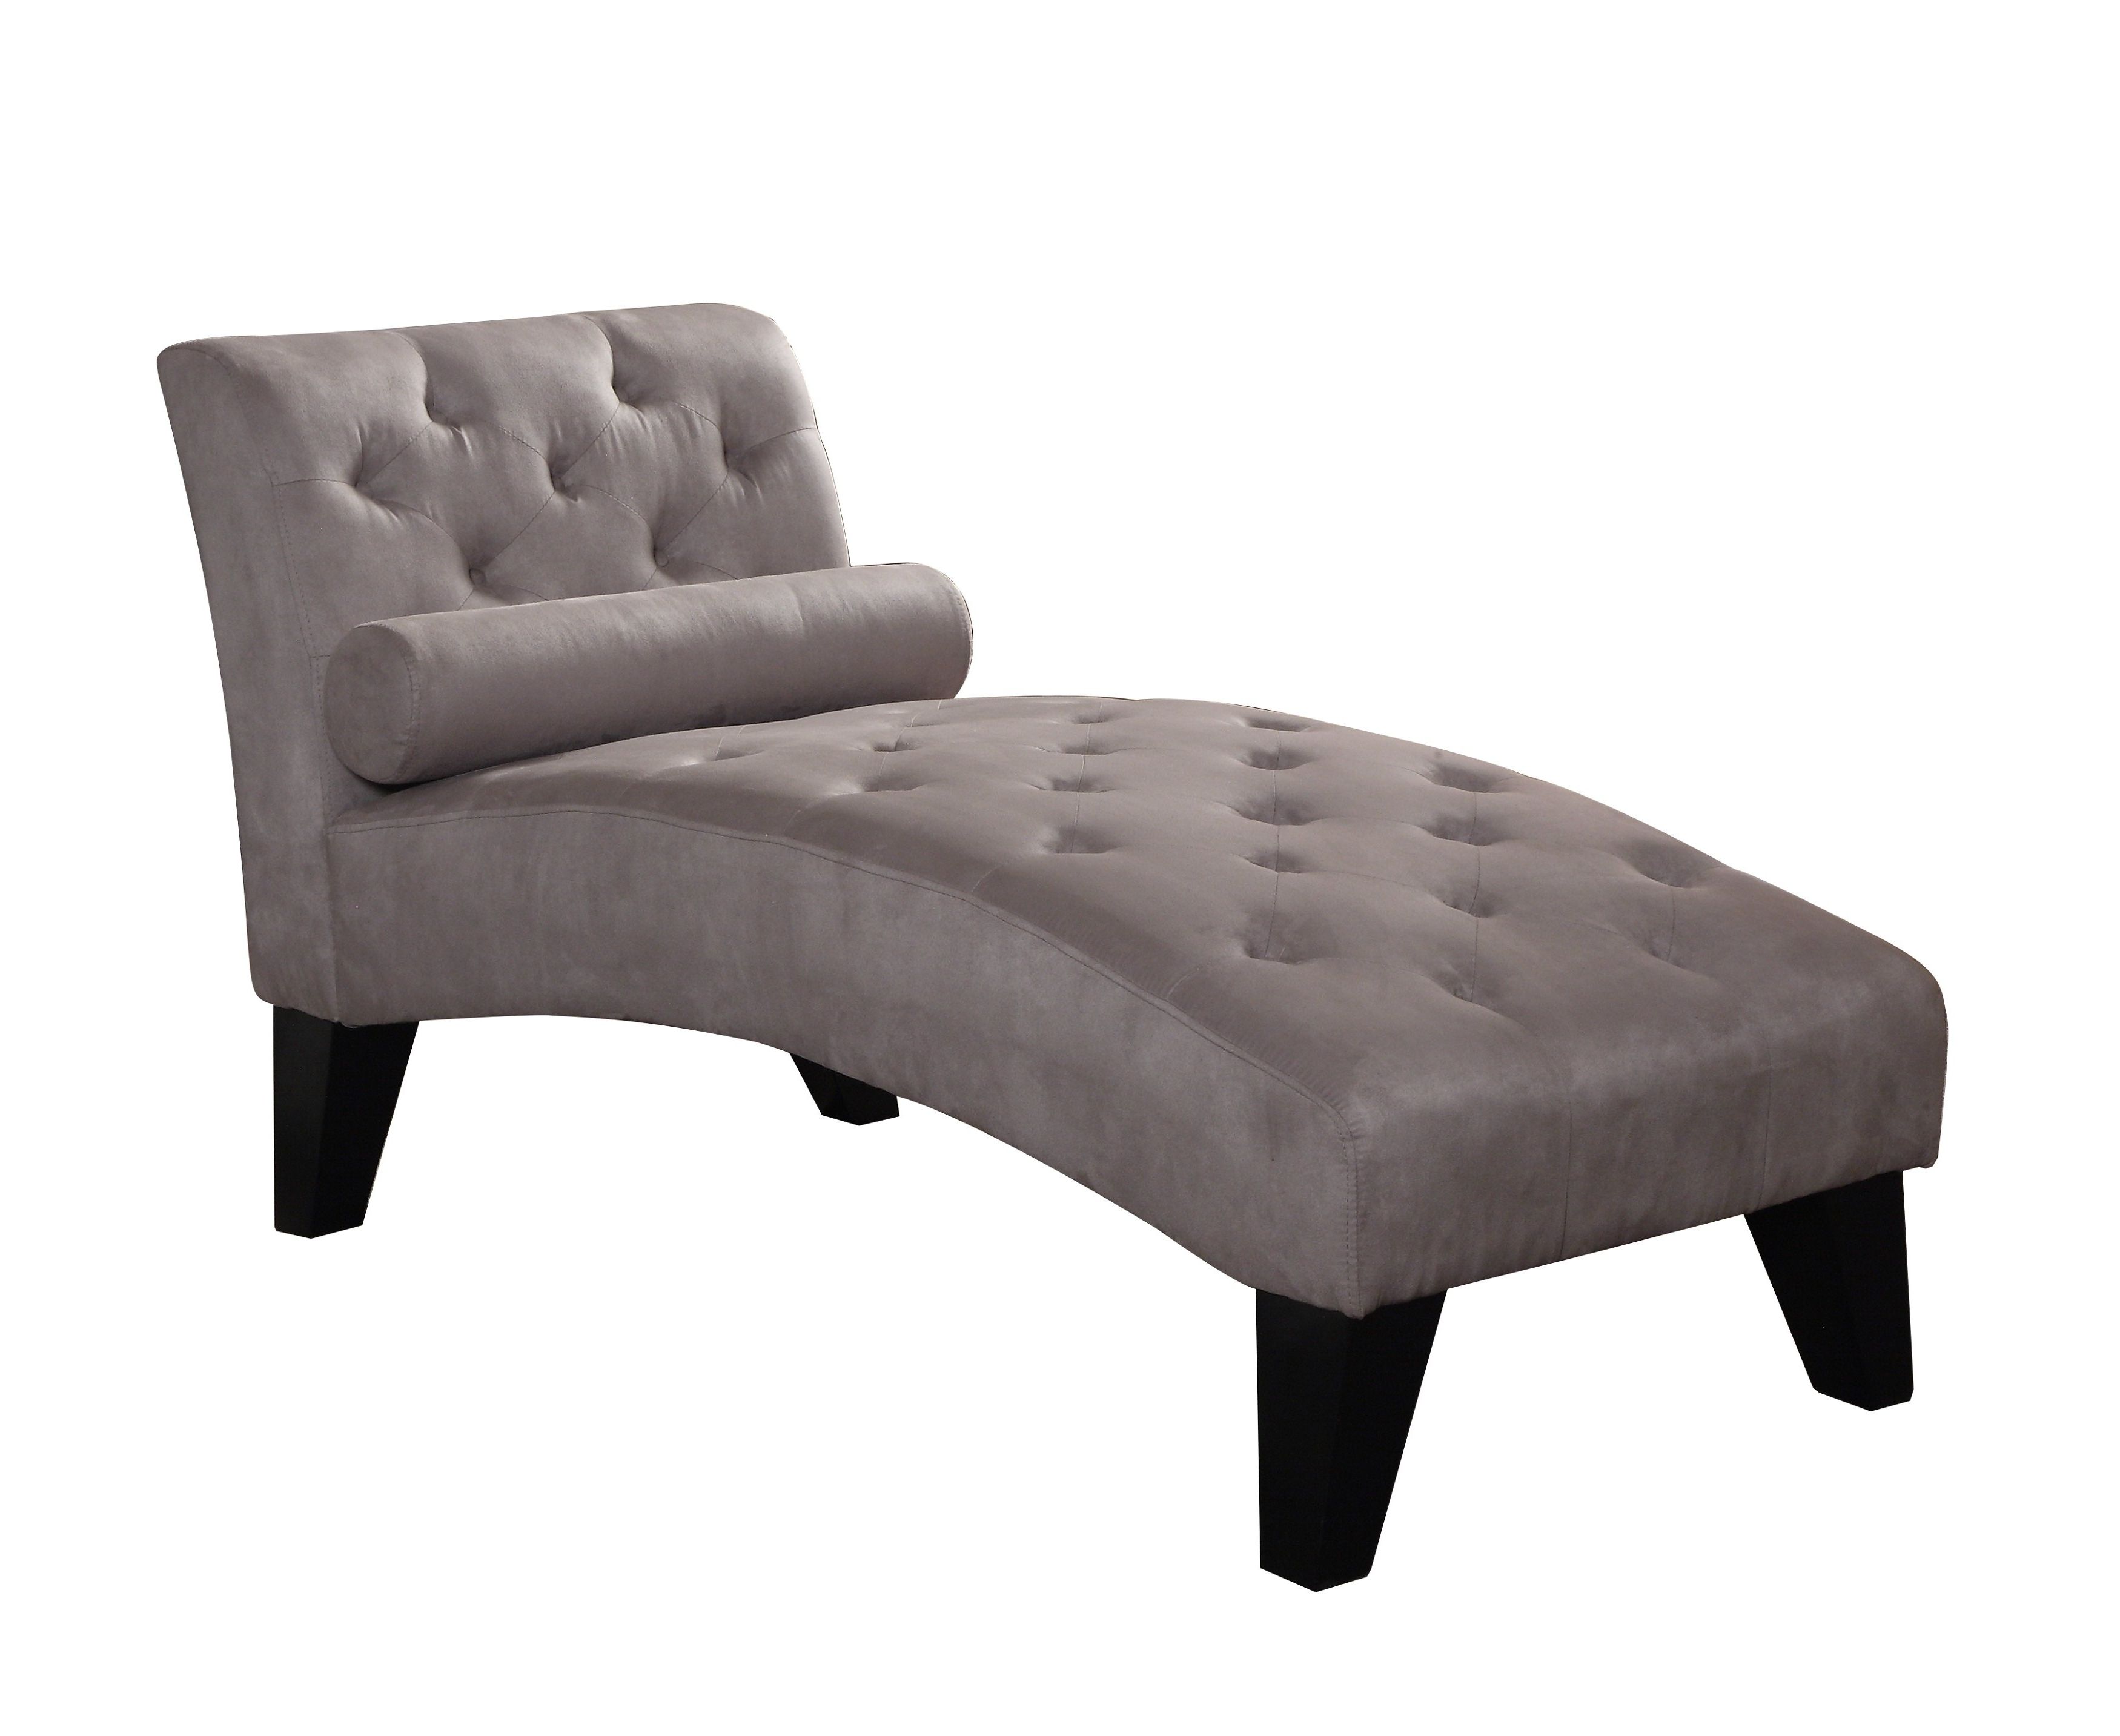 High Quality Chaise Lounge Chairs Pertaining To Popular Green Chaise Lounge Chairs You'll Love (View 3 of 15)